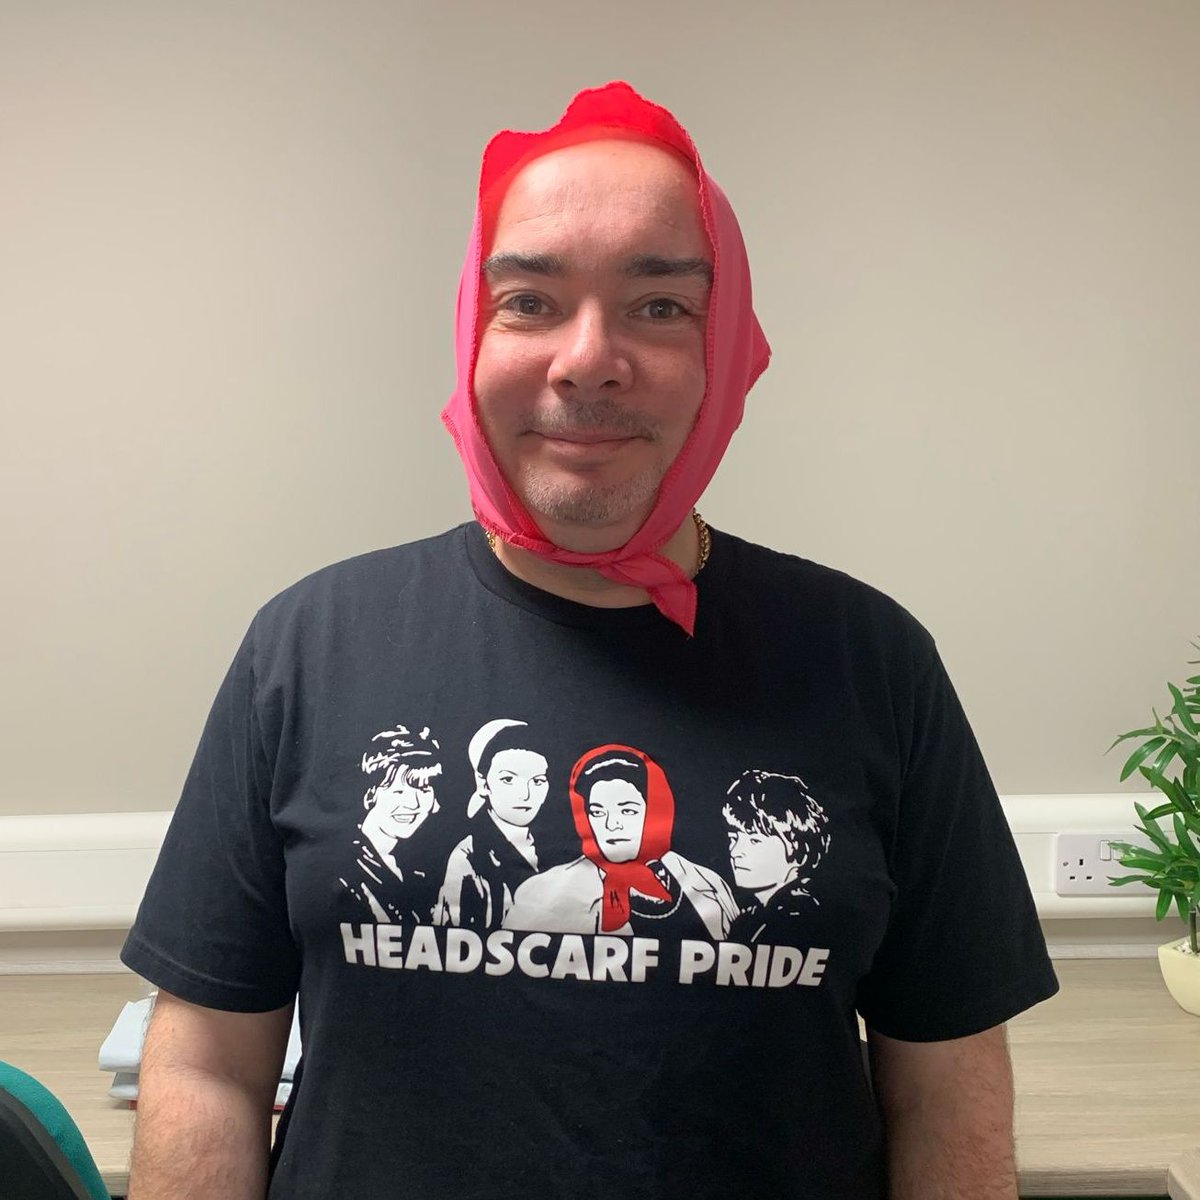 This week we’ve been busy putting the headscarves in the race packs for the #HeadscarfHustle and it made us wonder, #HowWillYouWearYours? We asked some friends for ideas 👇 We can't wait to see your styles on Sunday! 📷@FitmumsF, @GroundworkHull, @headscarfpride @Curlysathletes